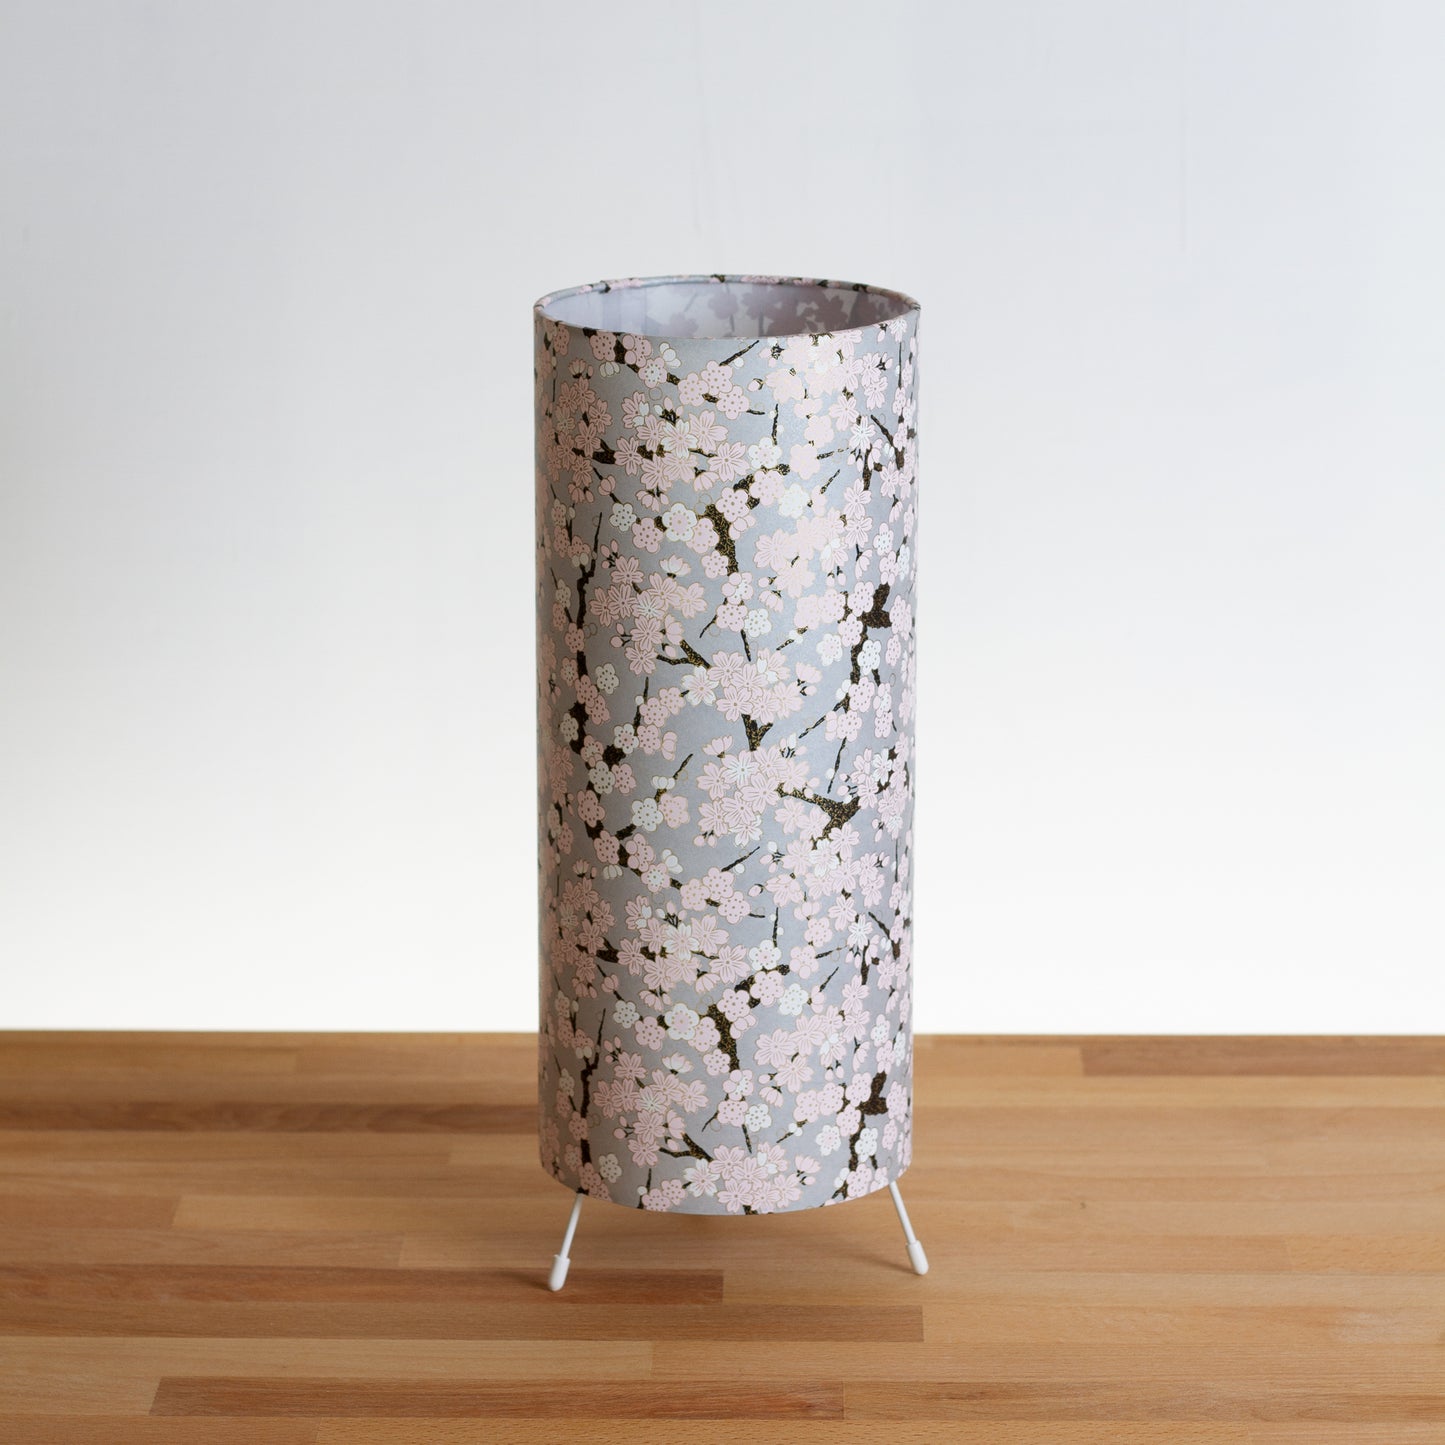 Free Standing Table Lamp Small - W02 ~ Pink Cherry Blossom on Grey